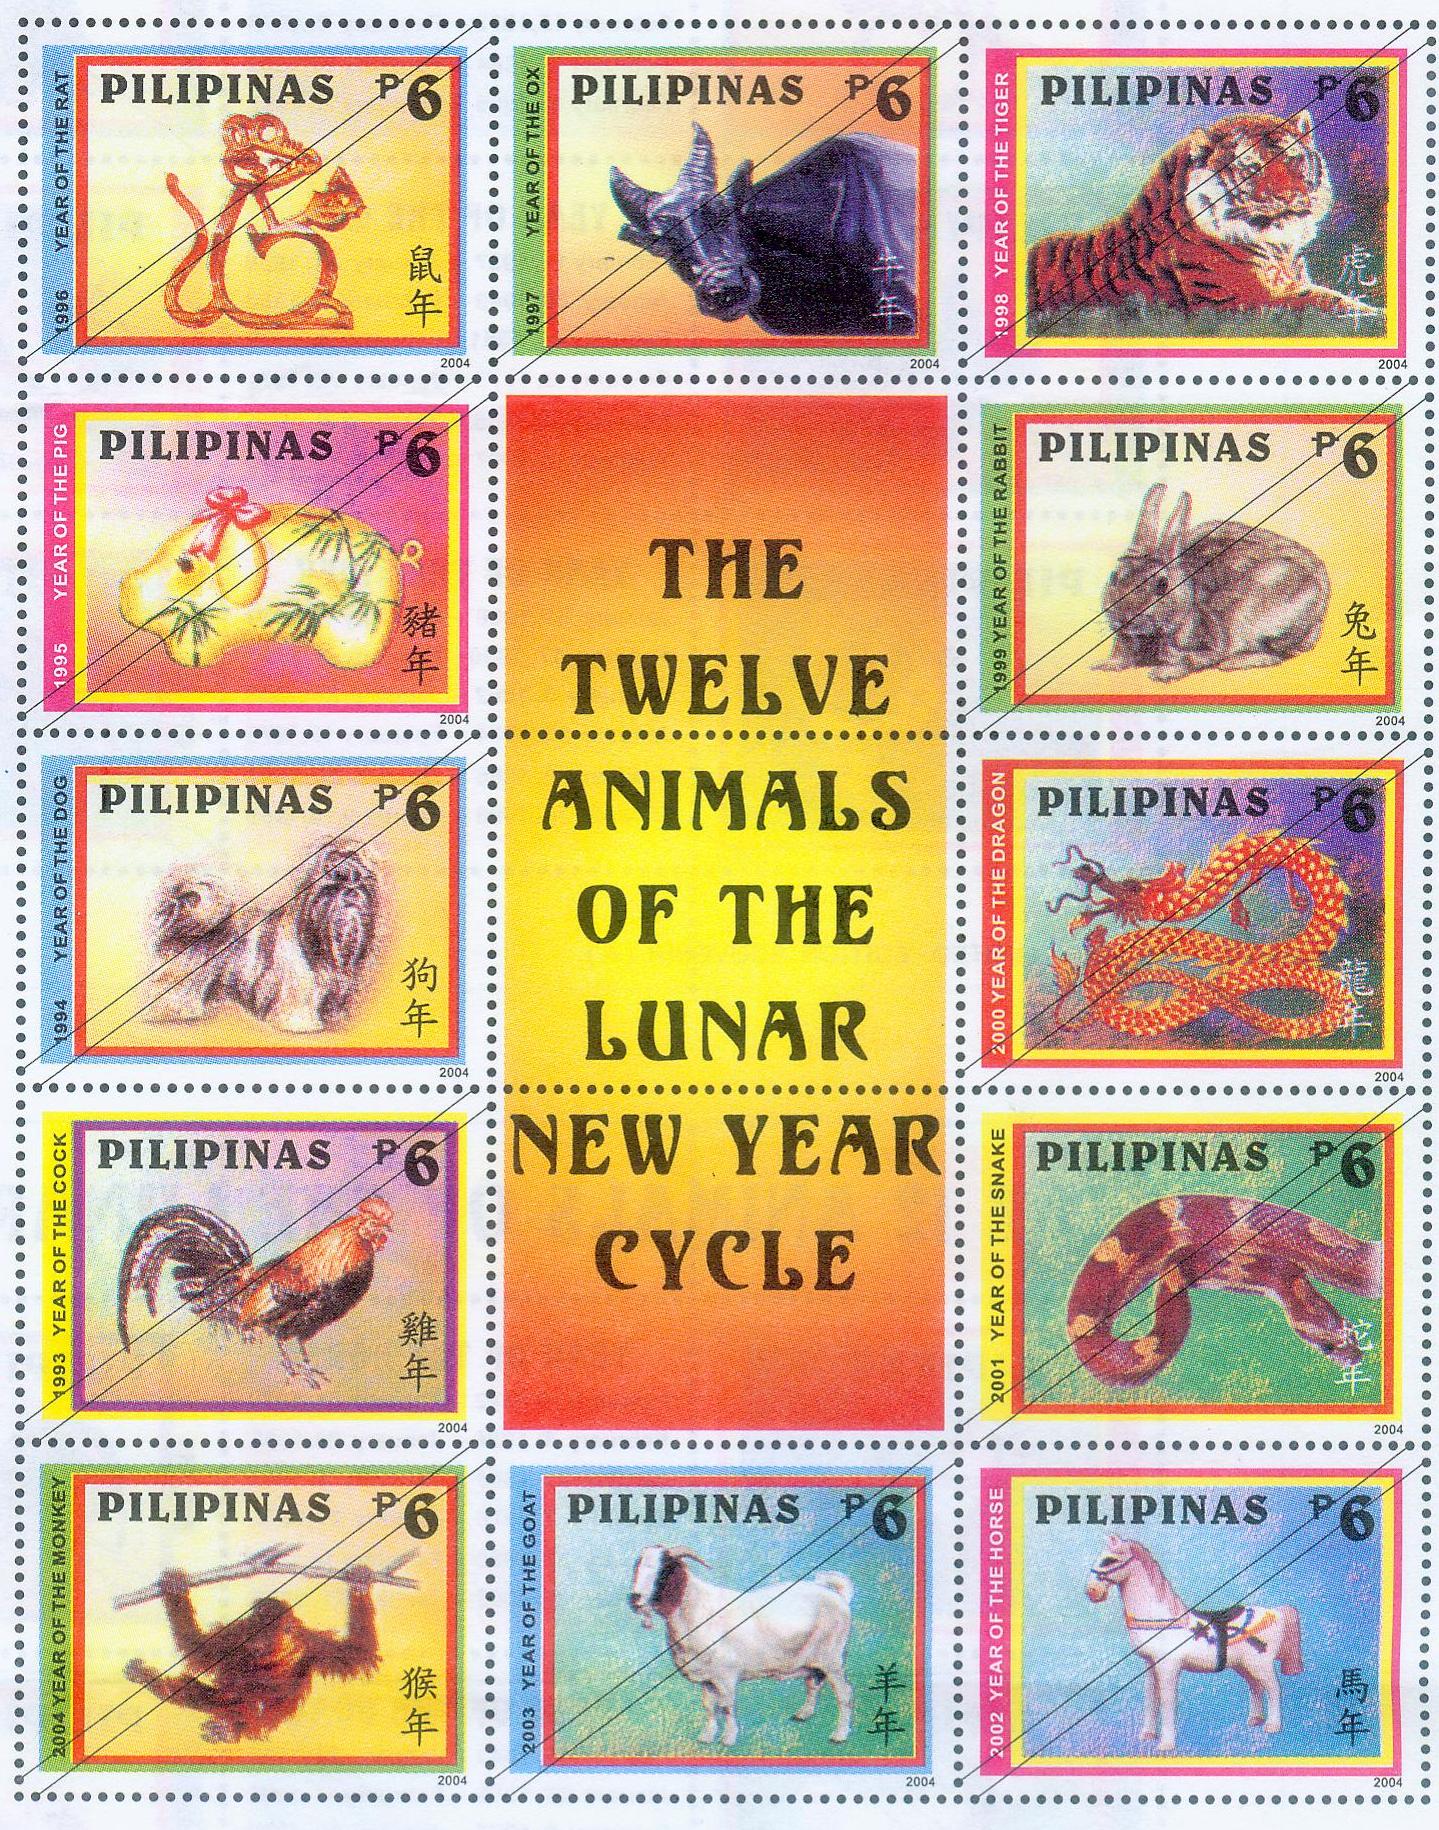 Trivia about the 12 Animals of the Lunar New Year Cycle | Philippine-Trivia